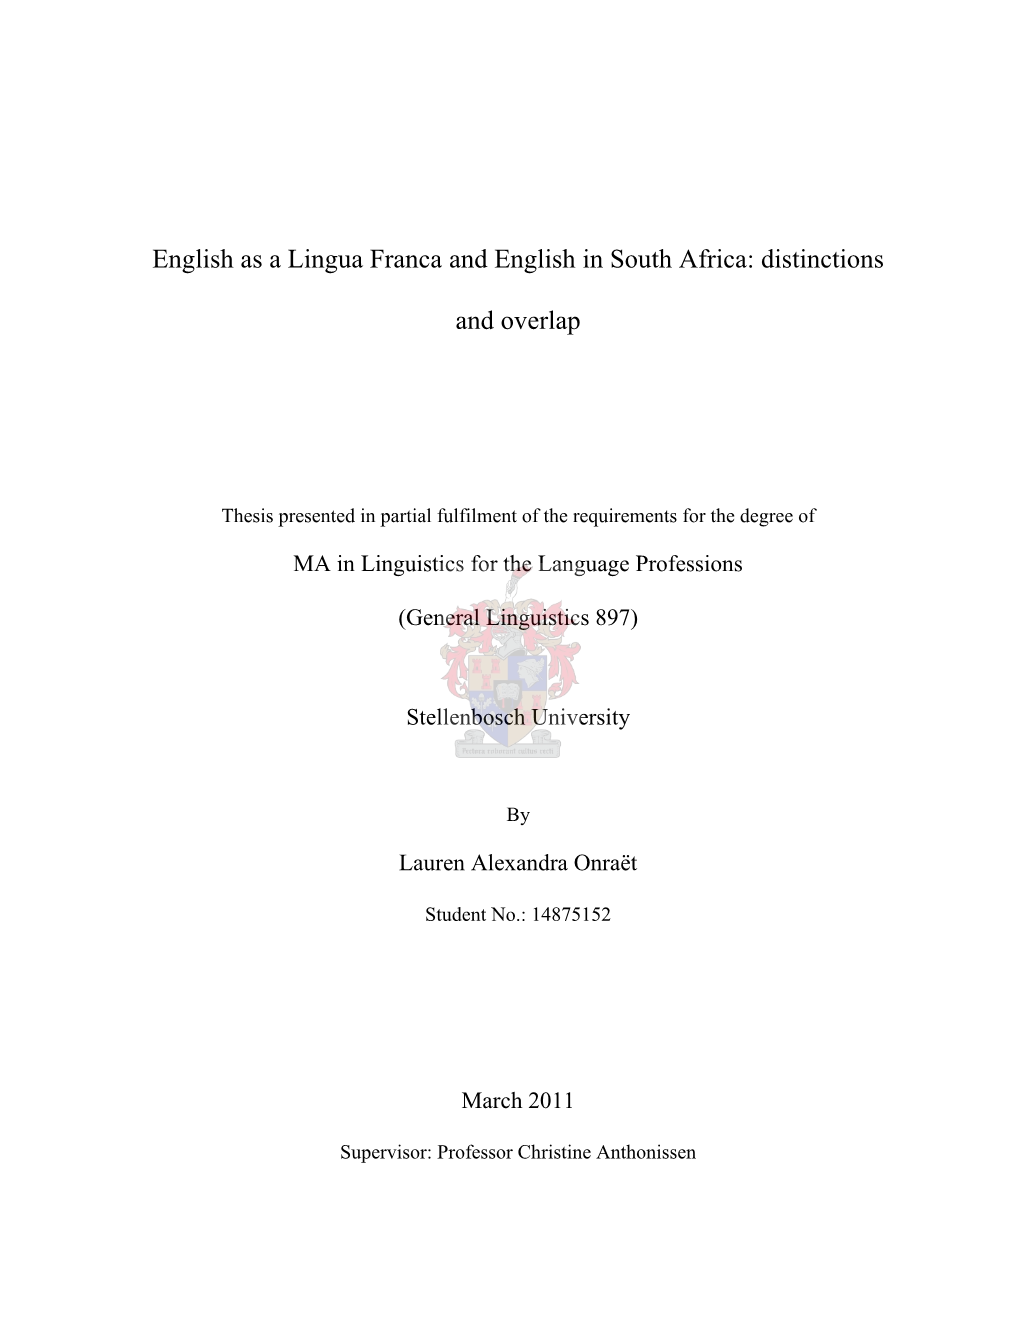 Typical Features of English As a Lingua Franca in Various South